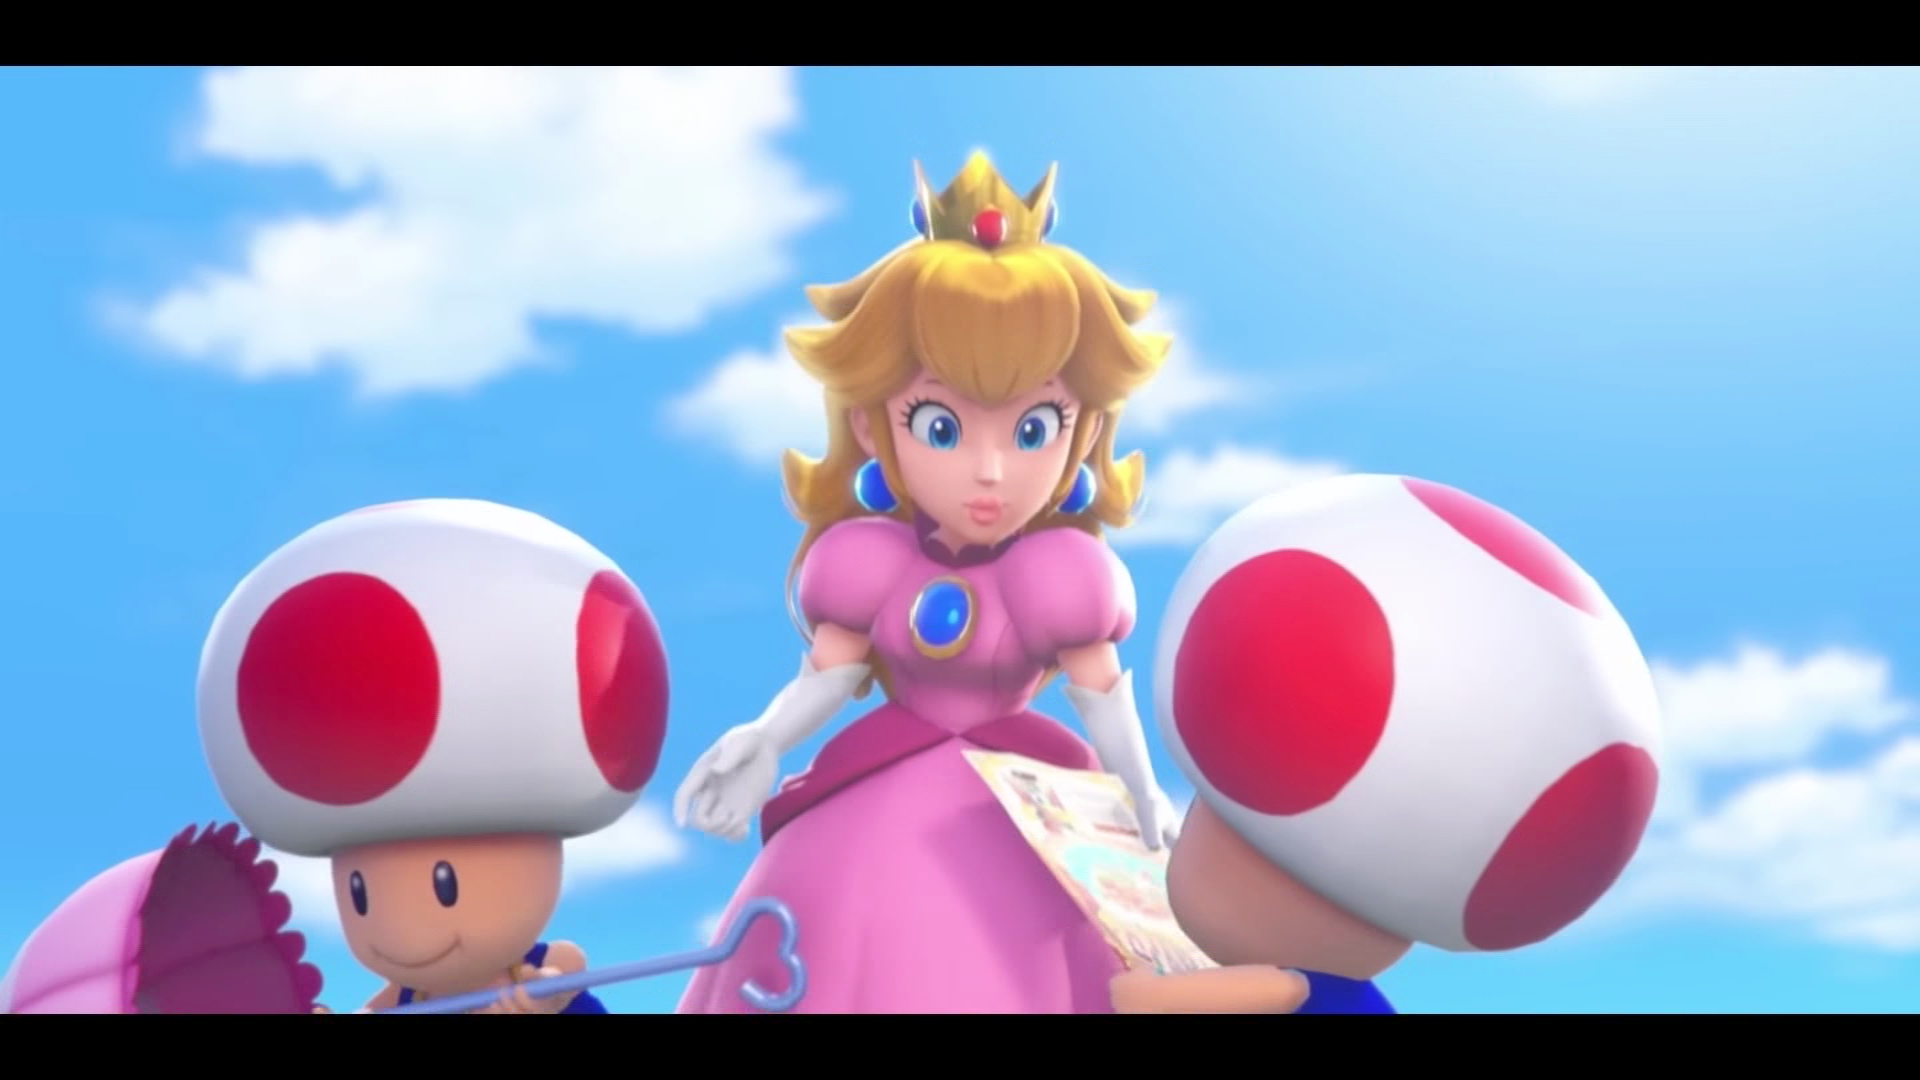 Game On: Princess Peach's new game